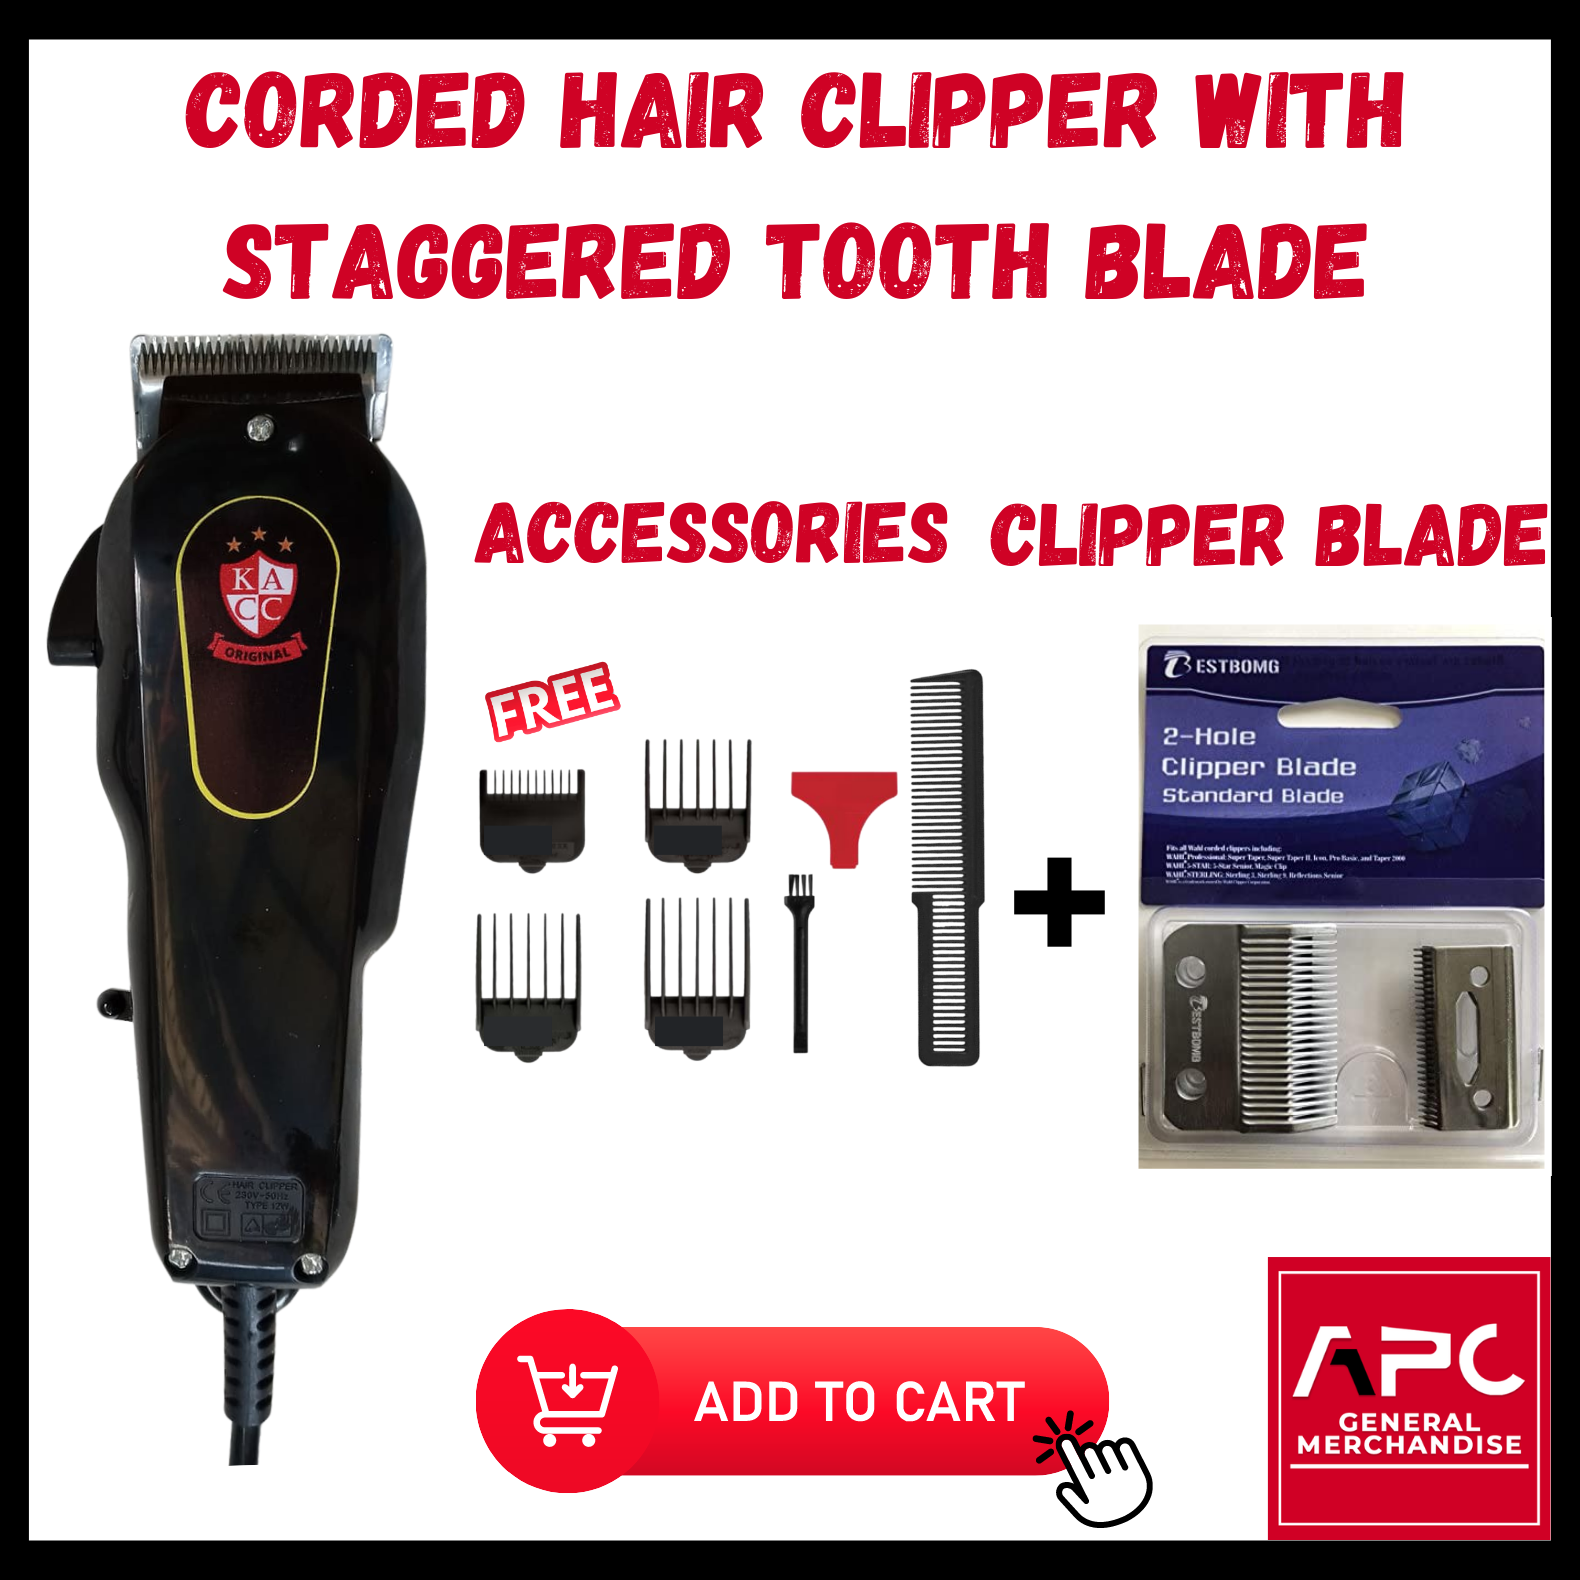 [APC] PROFESSIONAL HAIR CORDED CLIPPER WITH EXTRA STAGGERED TOOTH ...